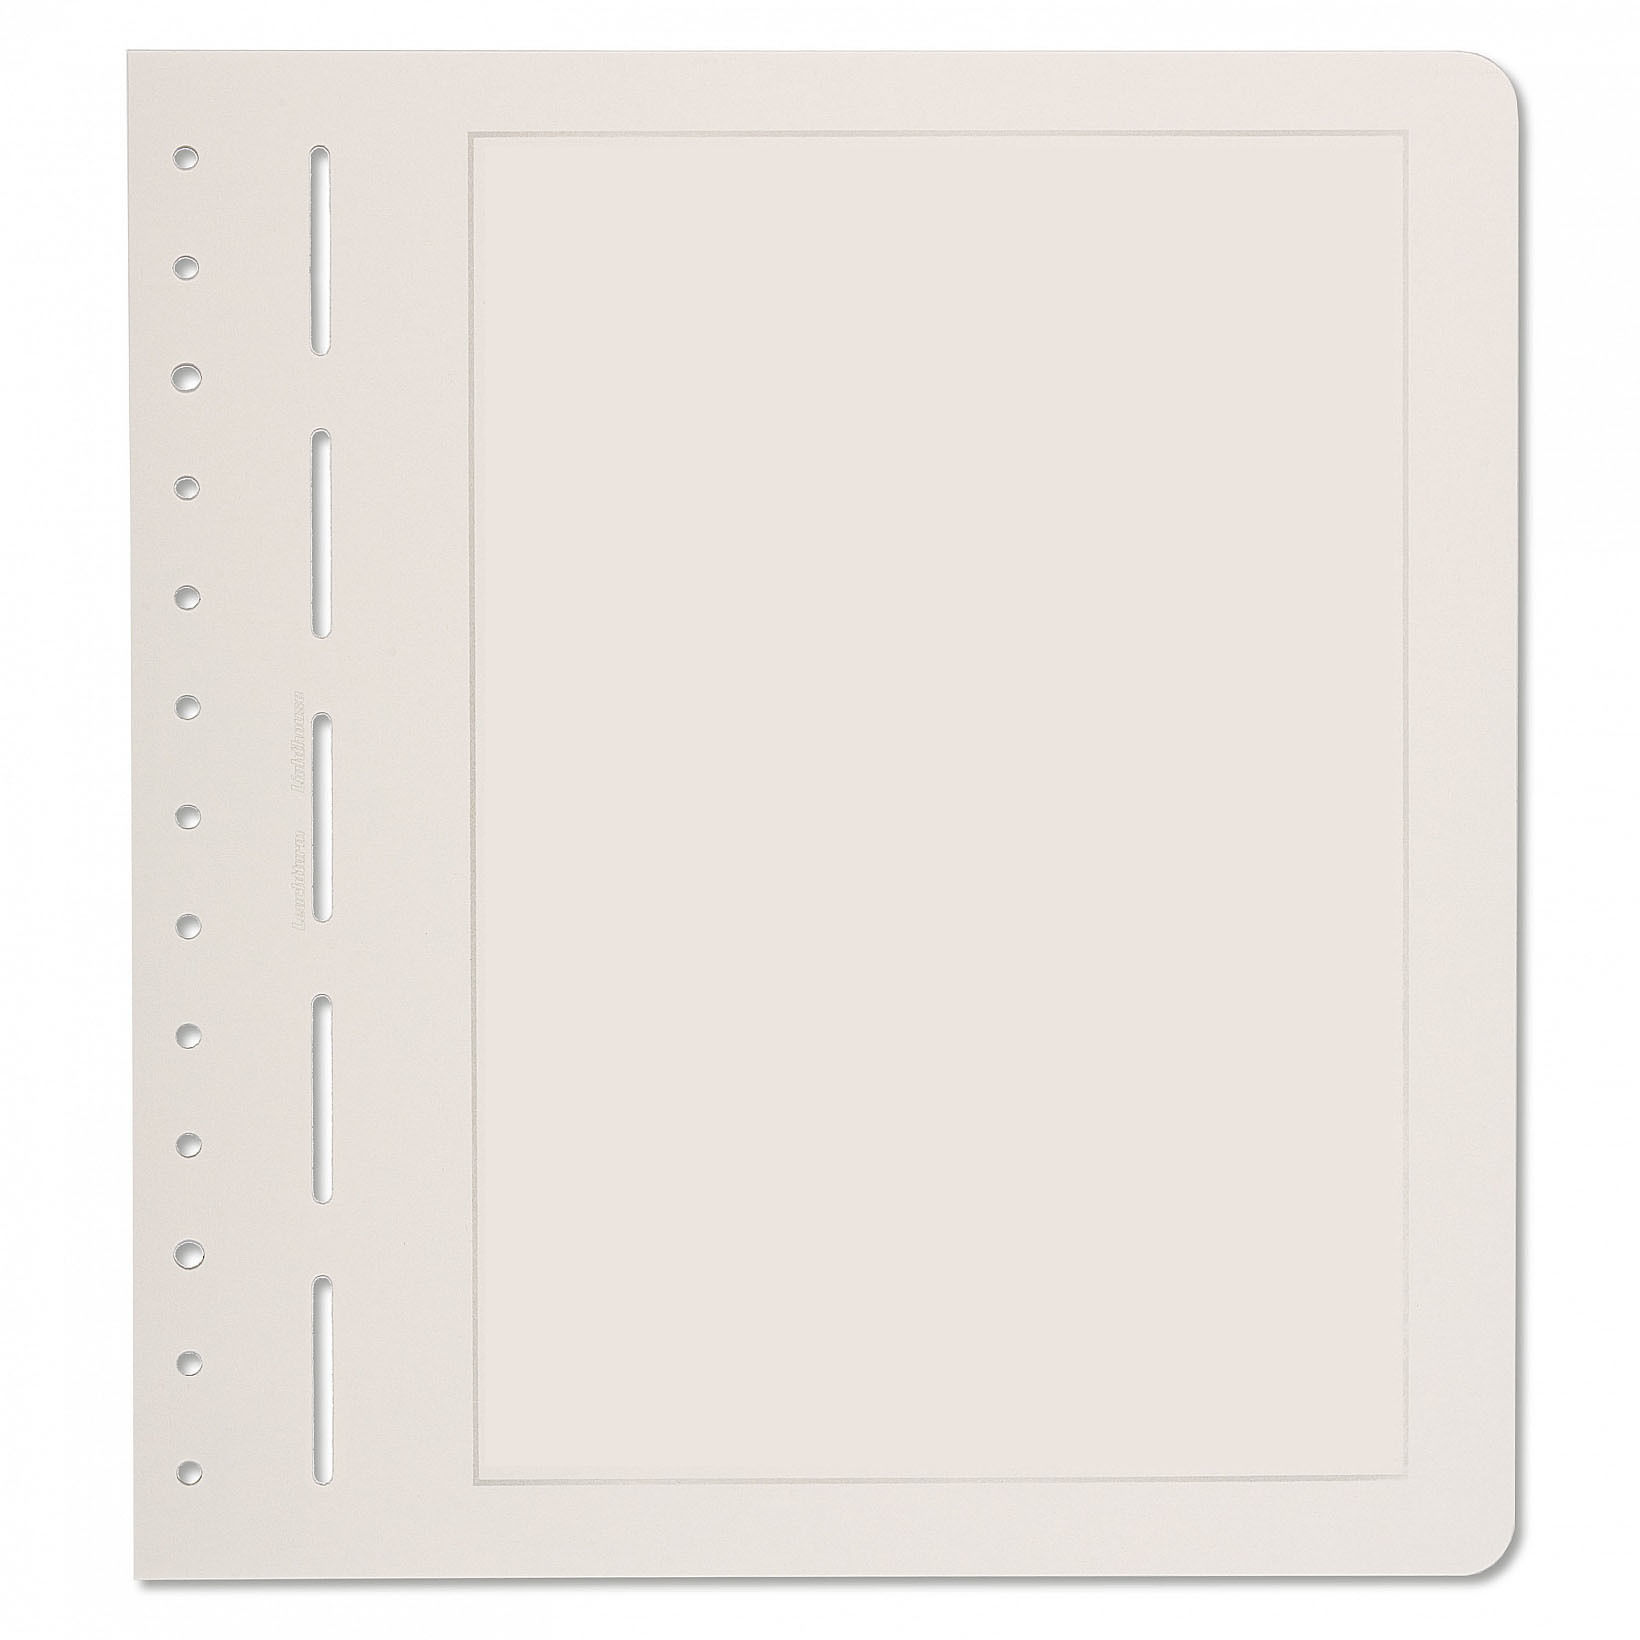 Blank Album Pages for Lighthouse stamp albums - Pages and Sheets for ...